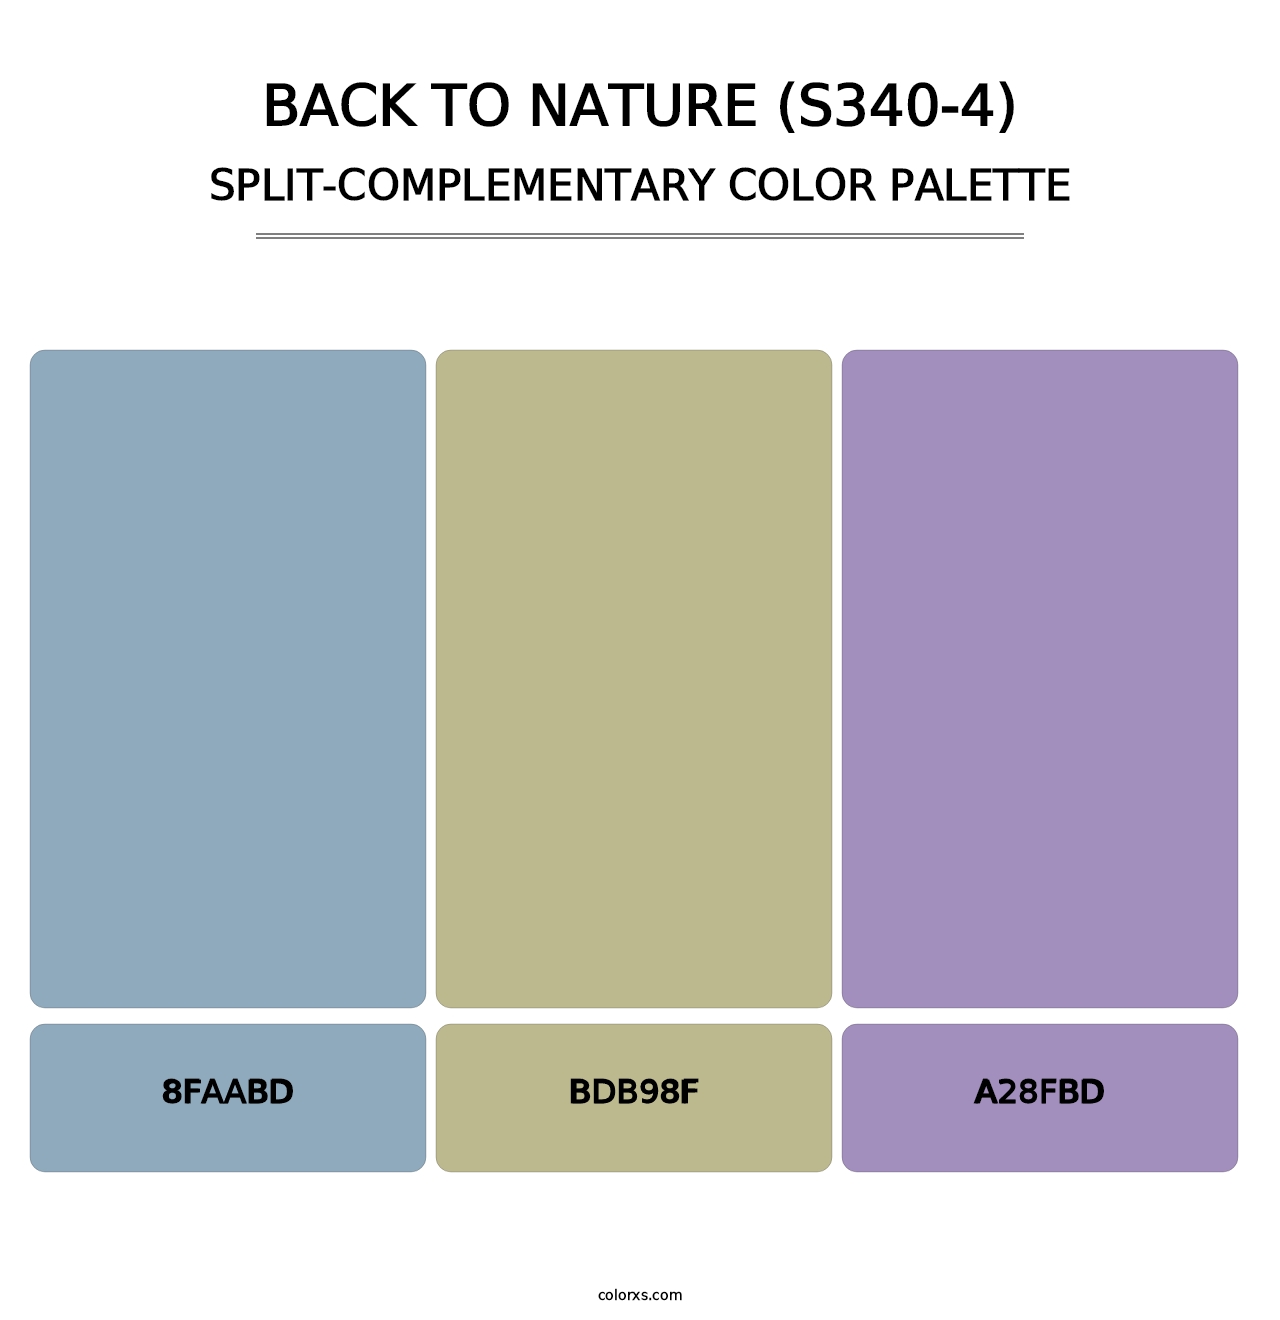 Back To Nature (S340-4) - Split-Complementary Color Palette